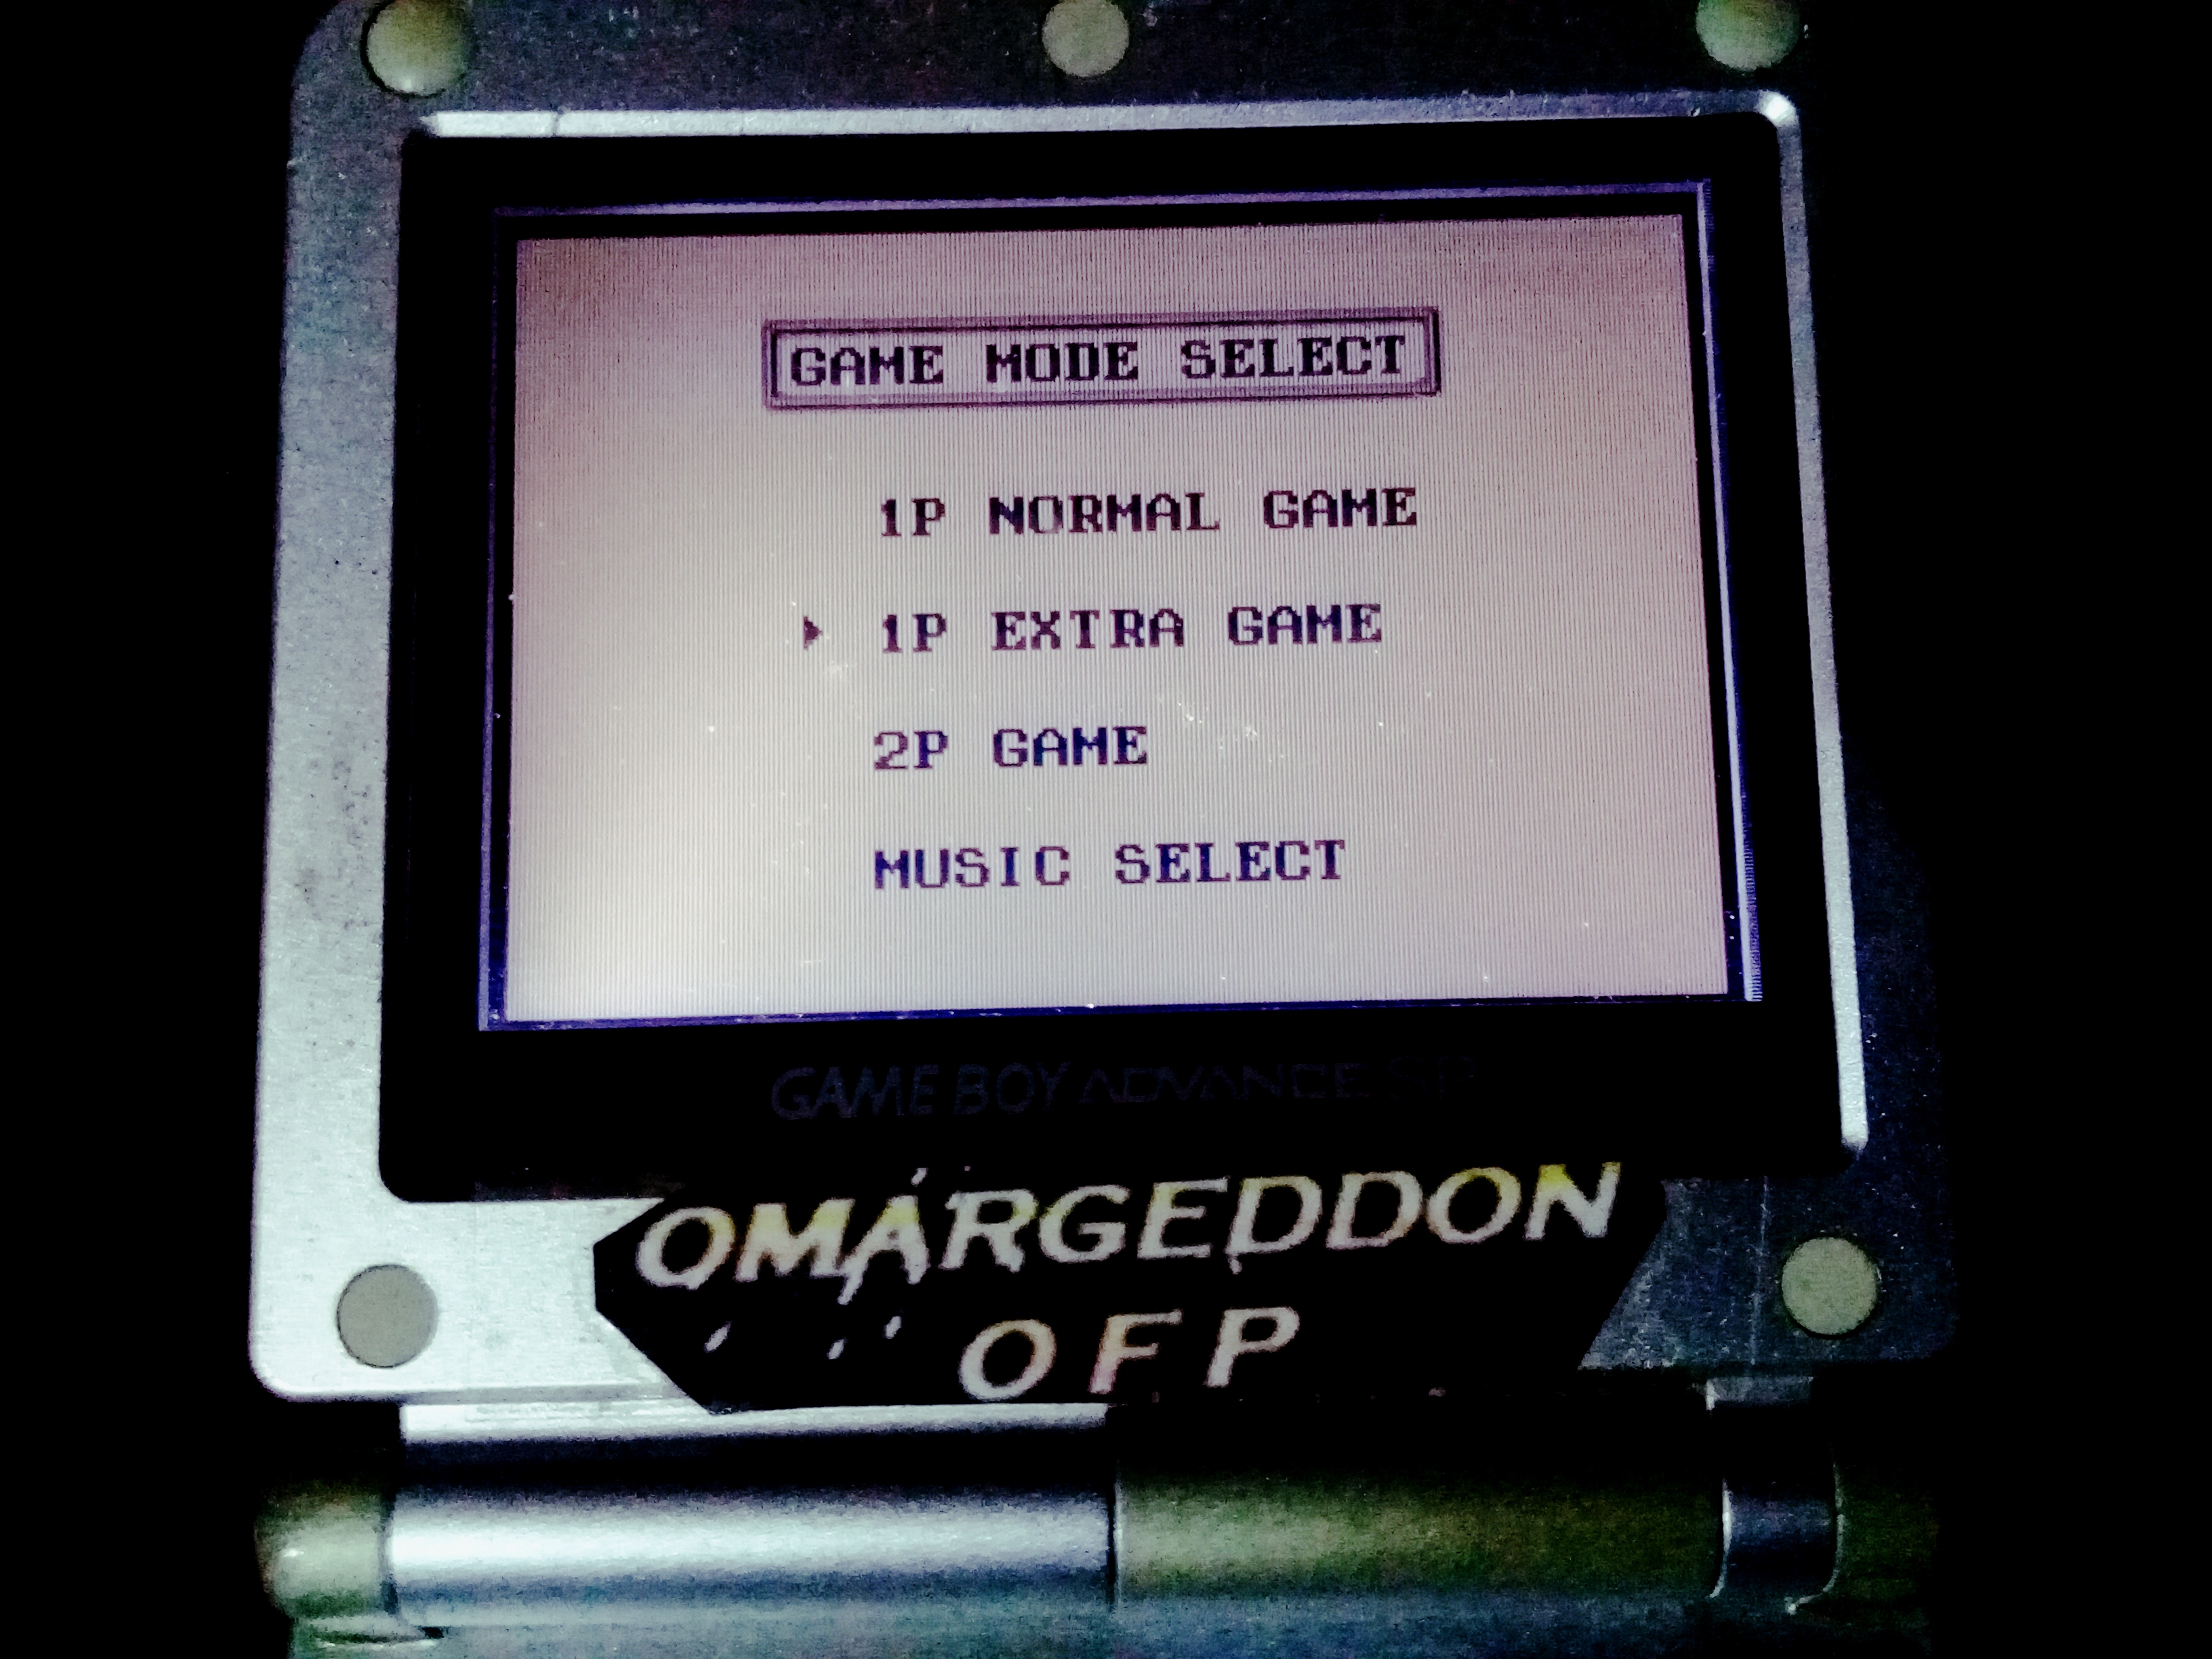 omargeddon: Pinball Party [Extra Game] (Game Boy) 114,400 points on 2020-09-14 01:53:33